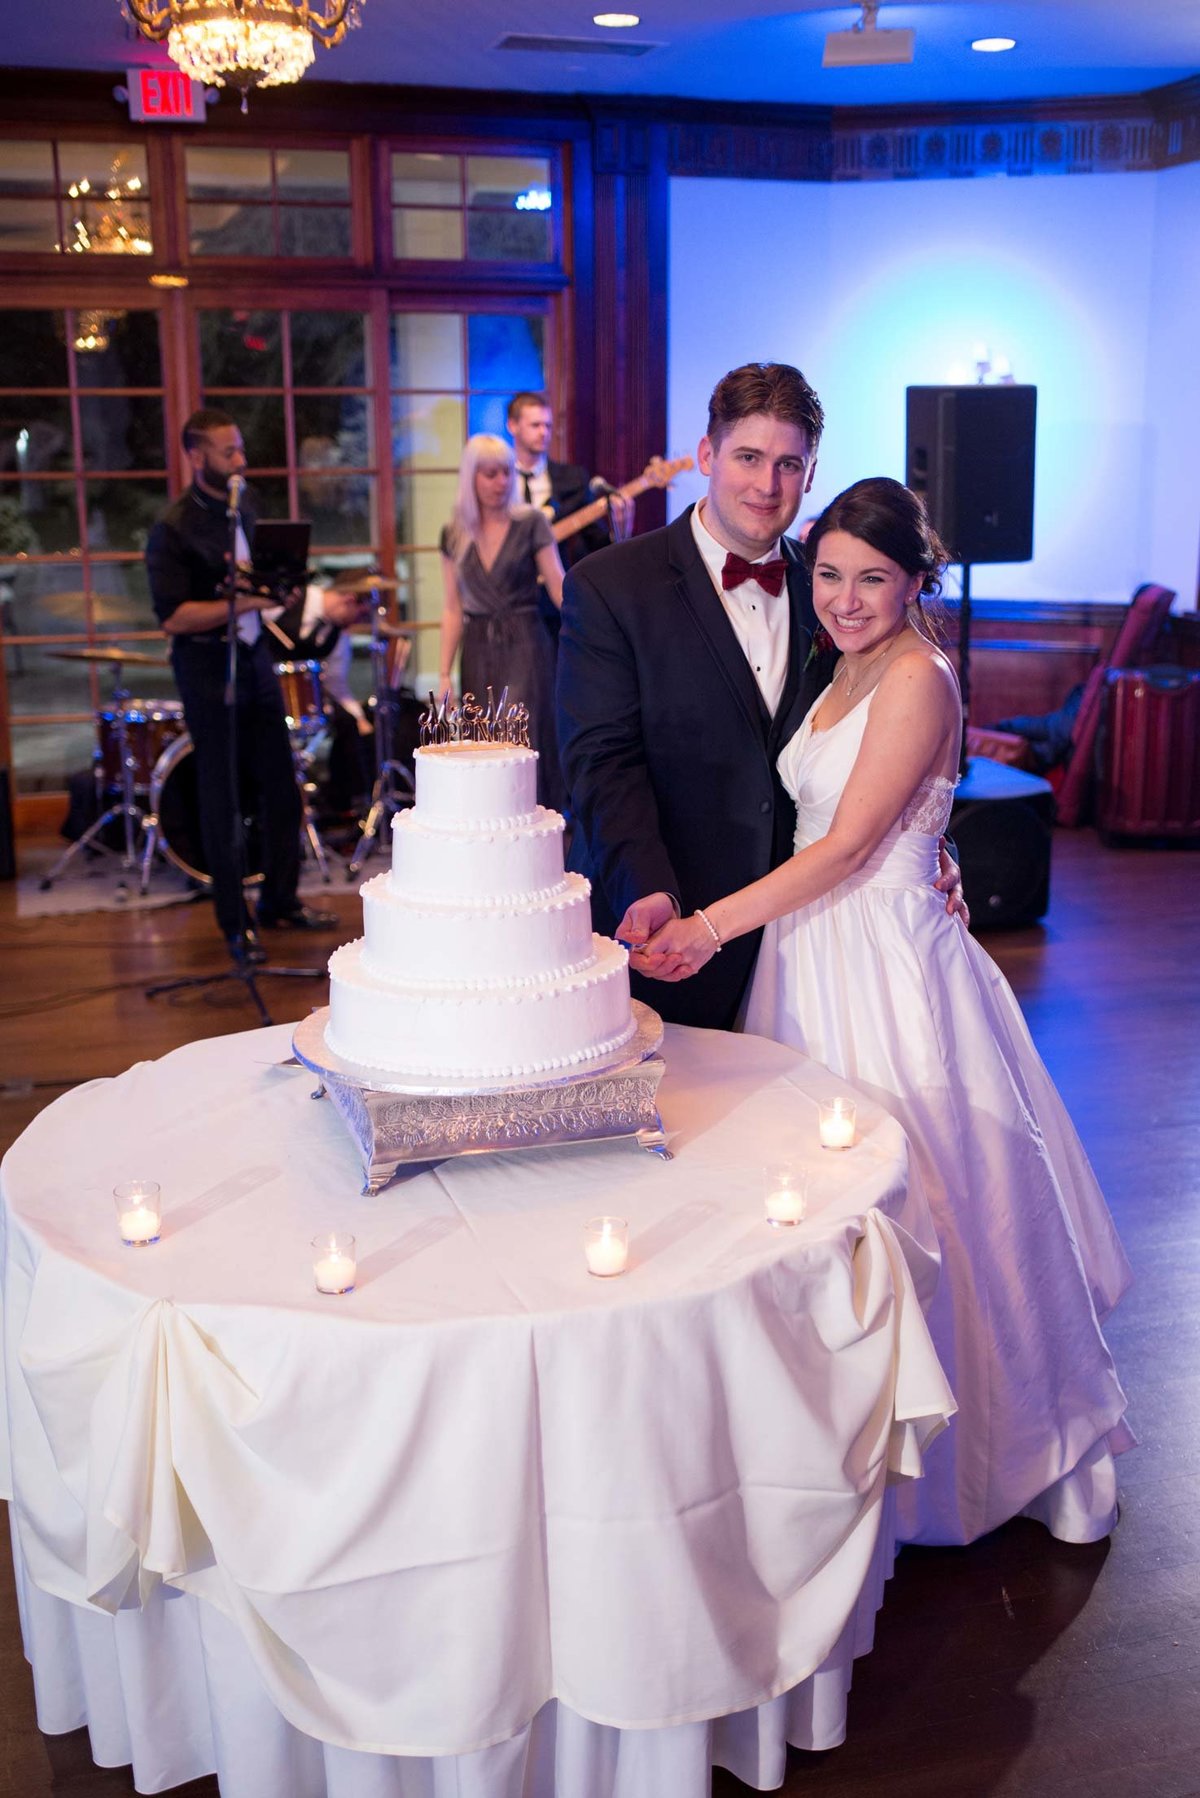 Bride and groom cutting their cake at The Mansion at Oyster Bay